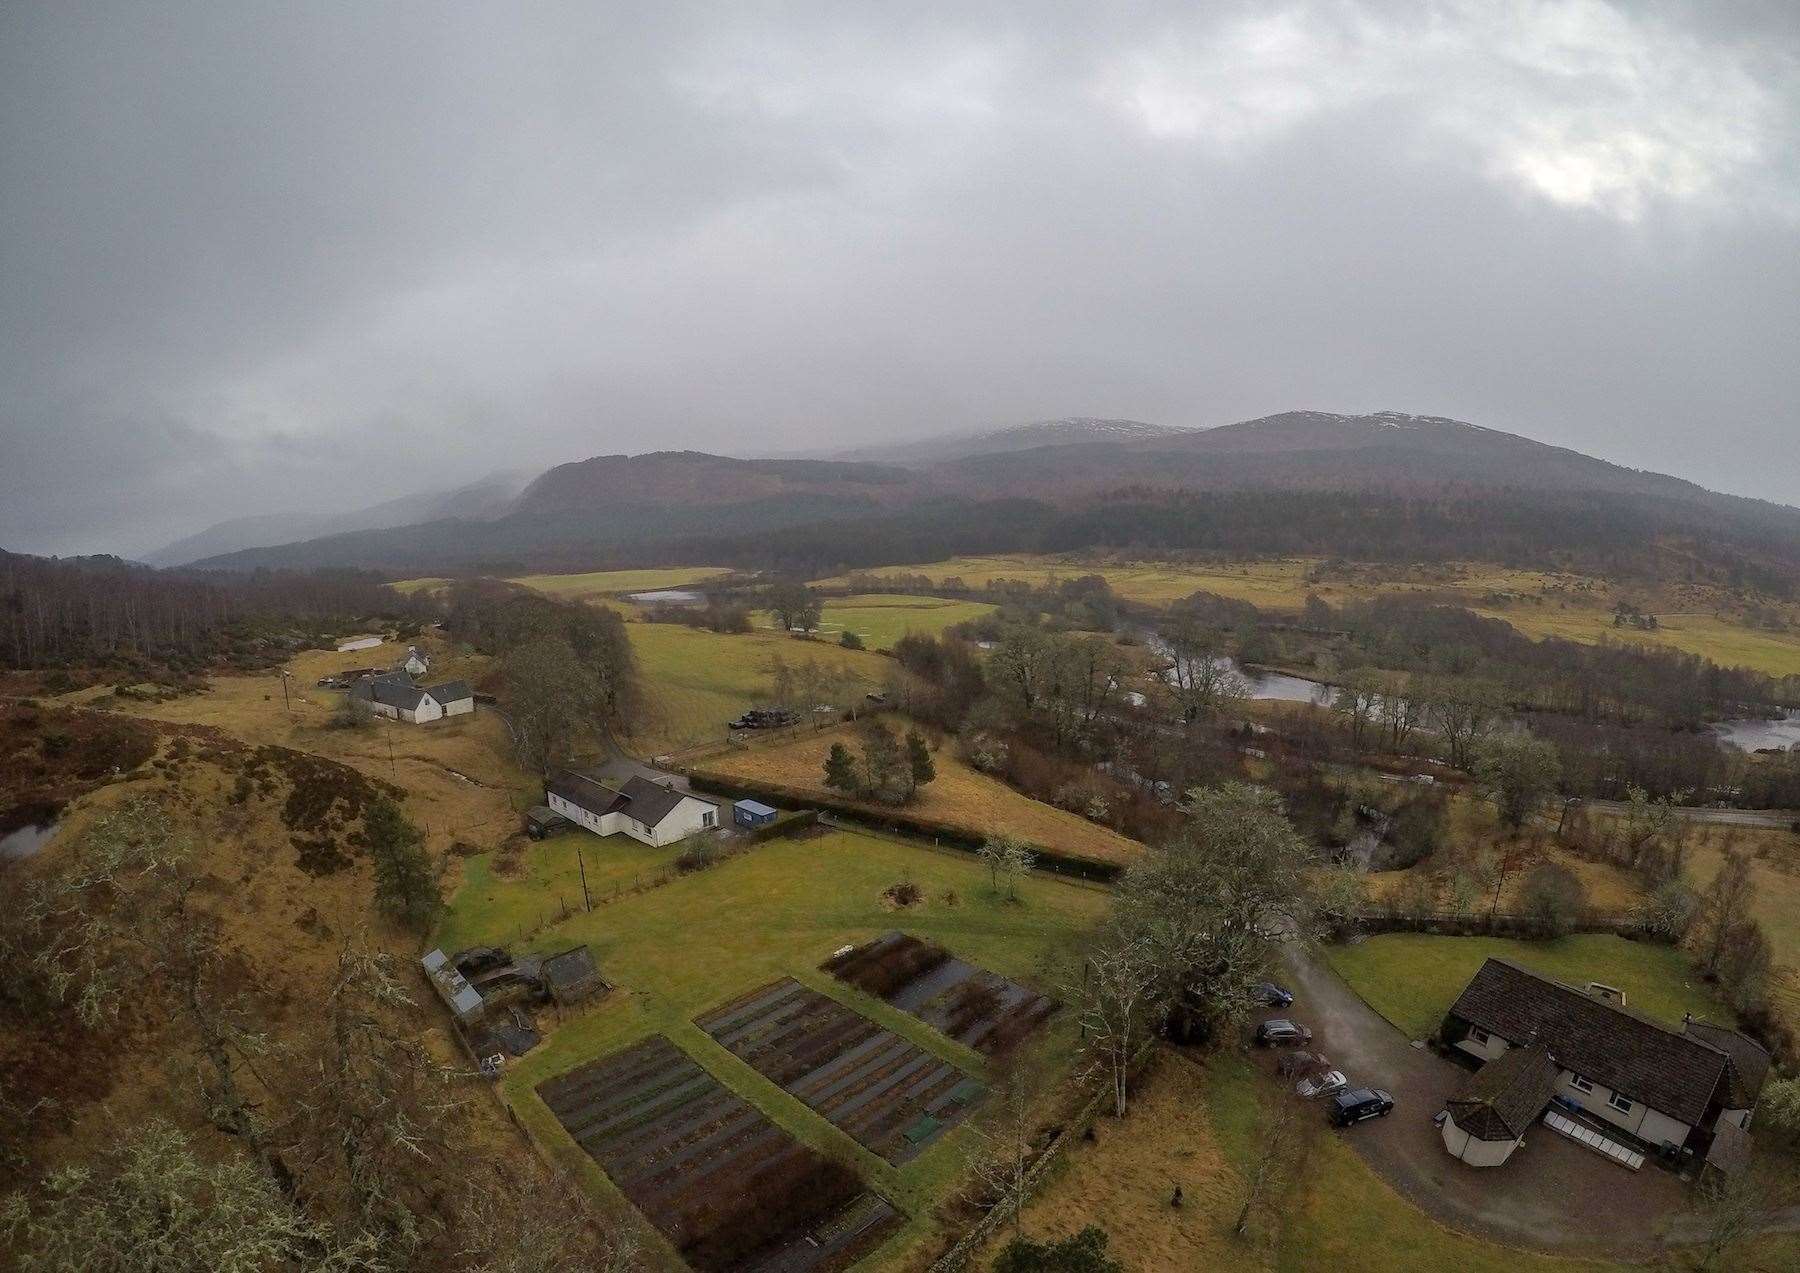 The new Rewilding Centre is planned for Trees for Life's estate at Dundreggan, close to Loch Ness.